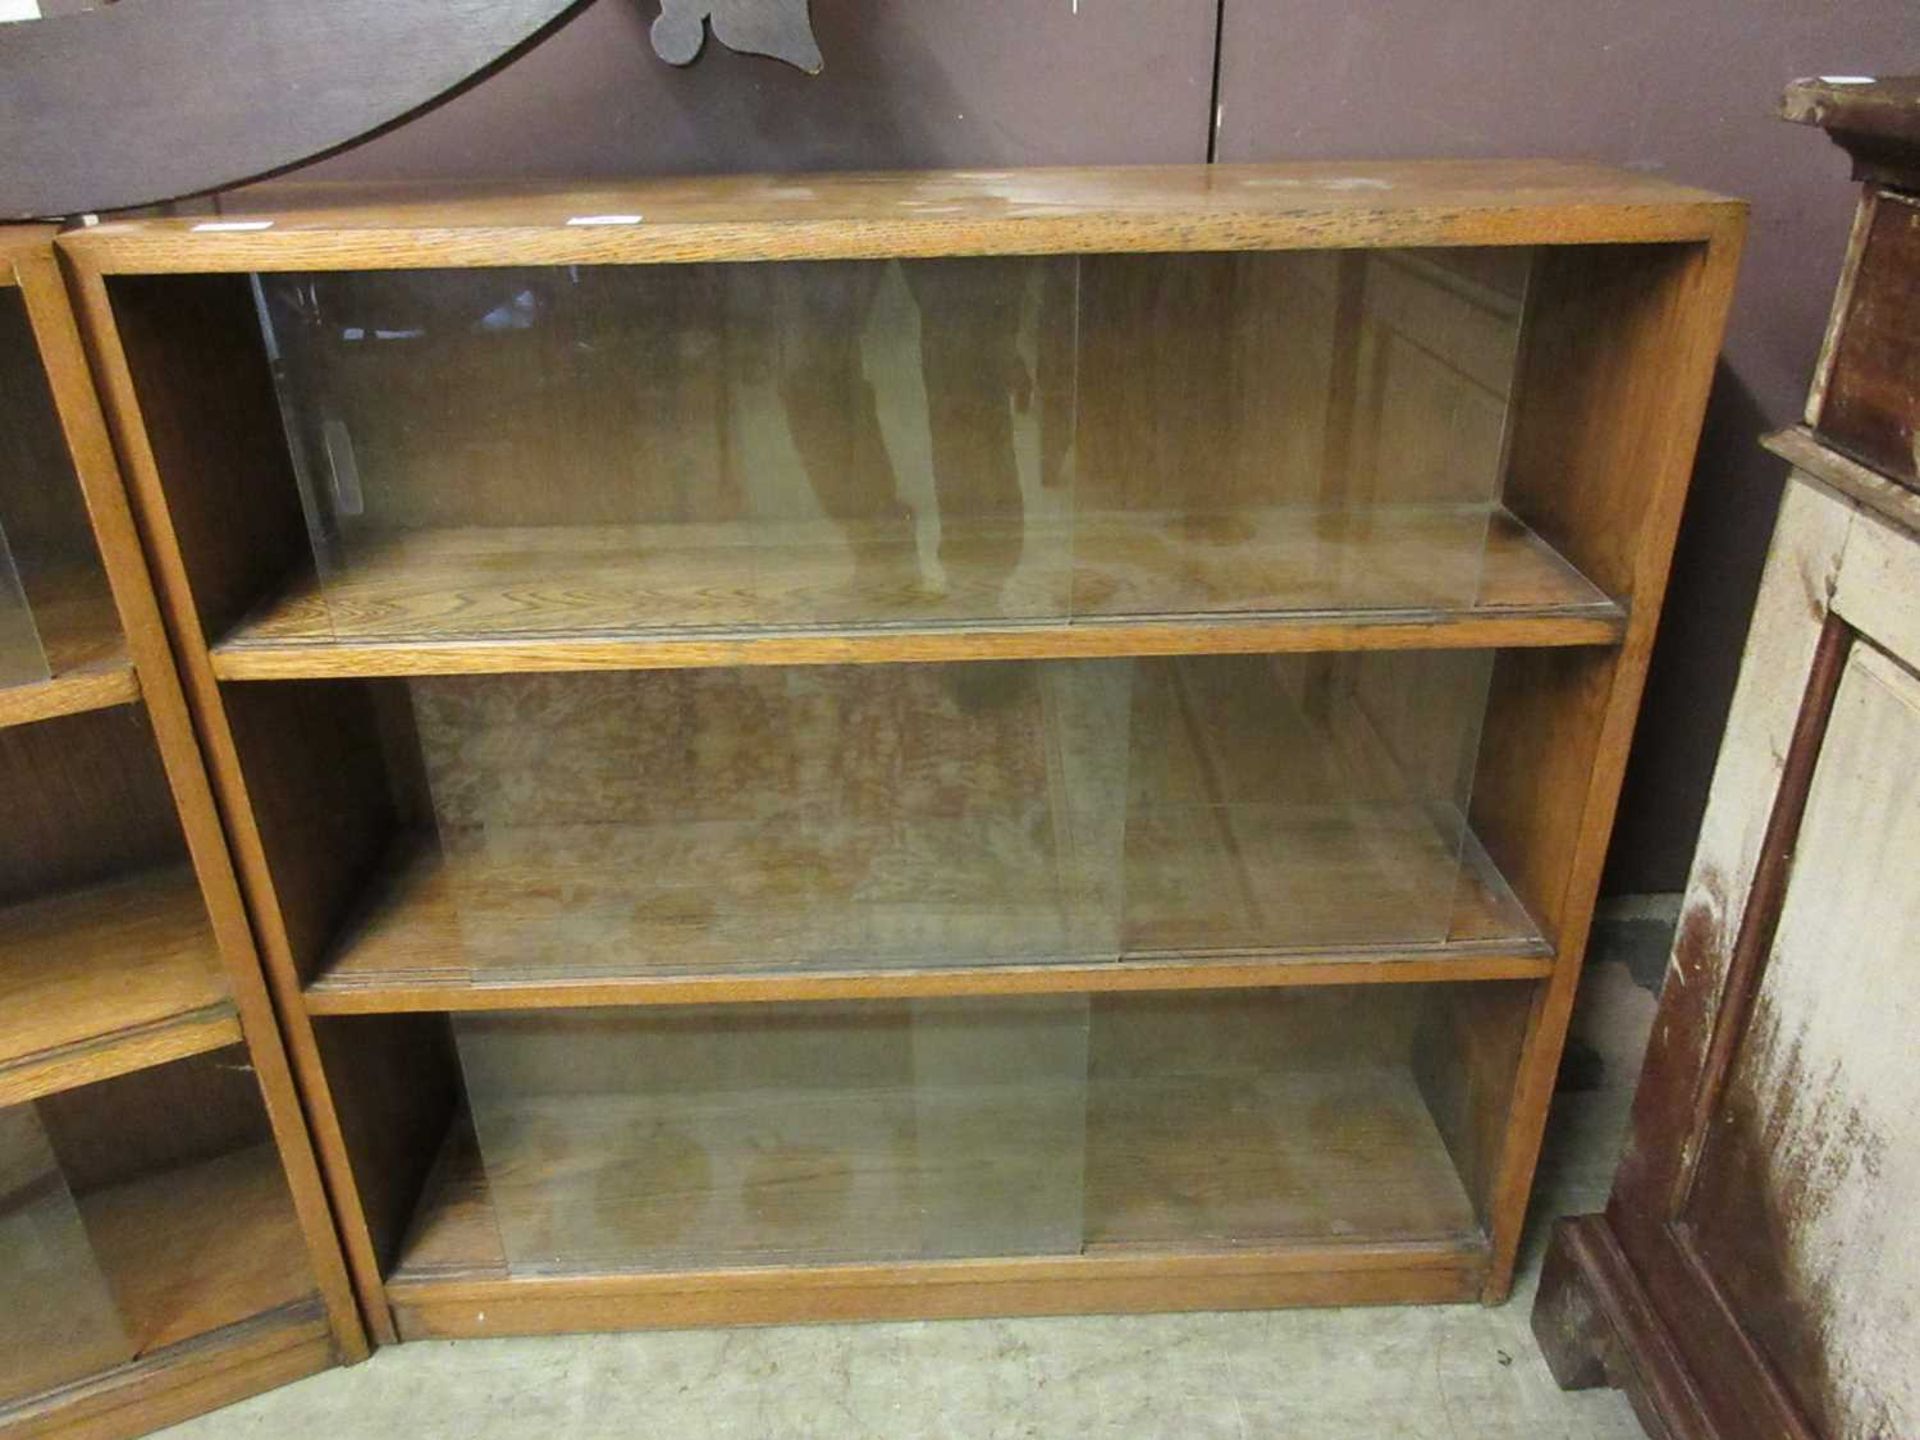 A mid-20th century oak bookcase with glass sliding doors